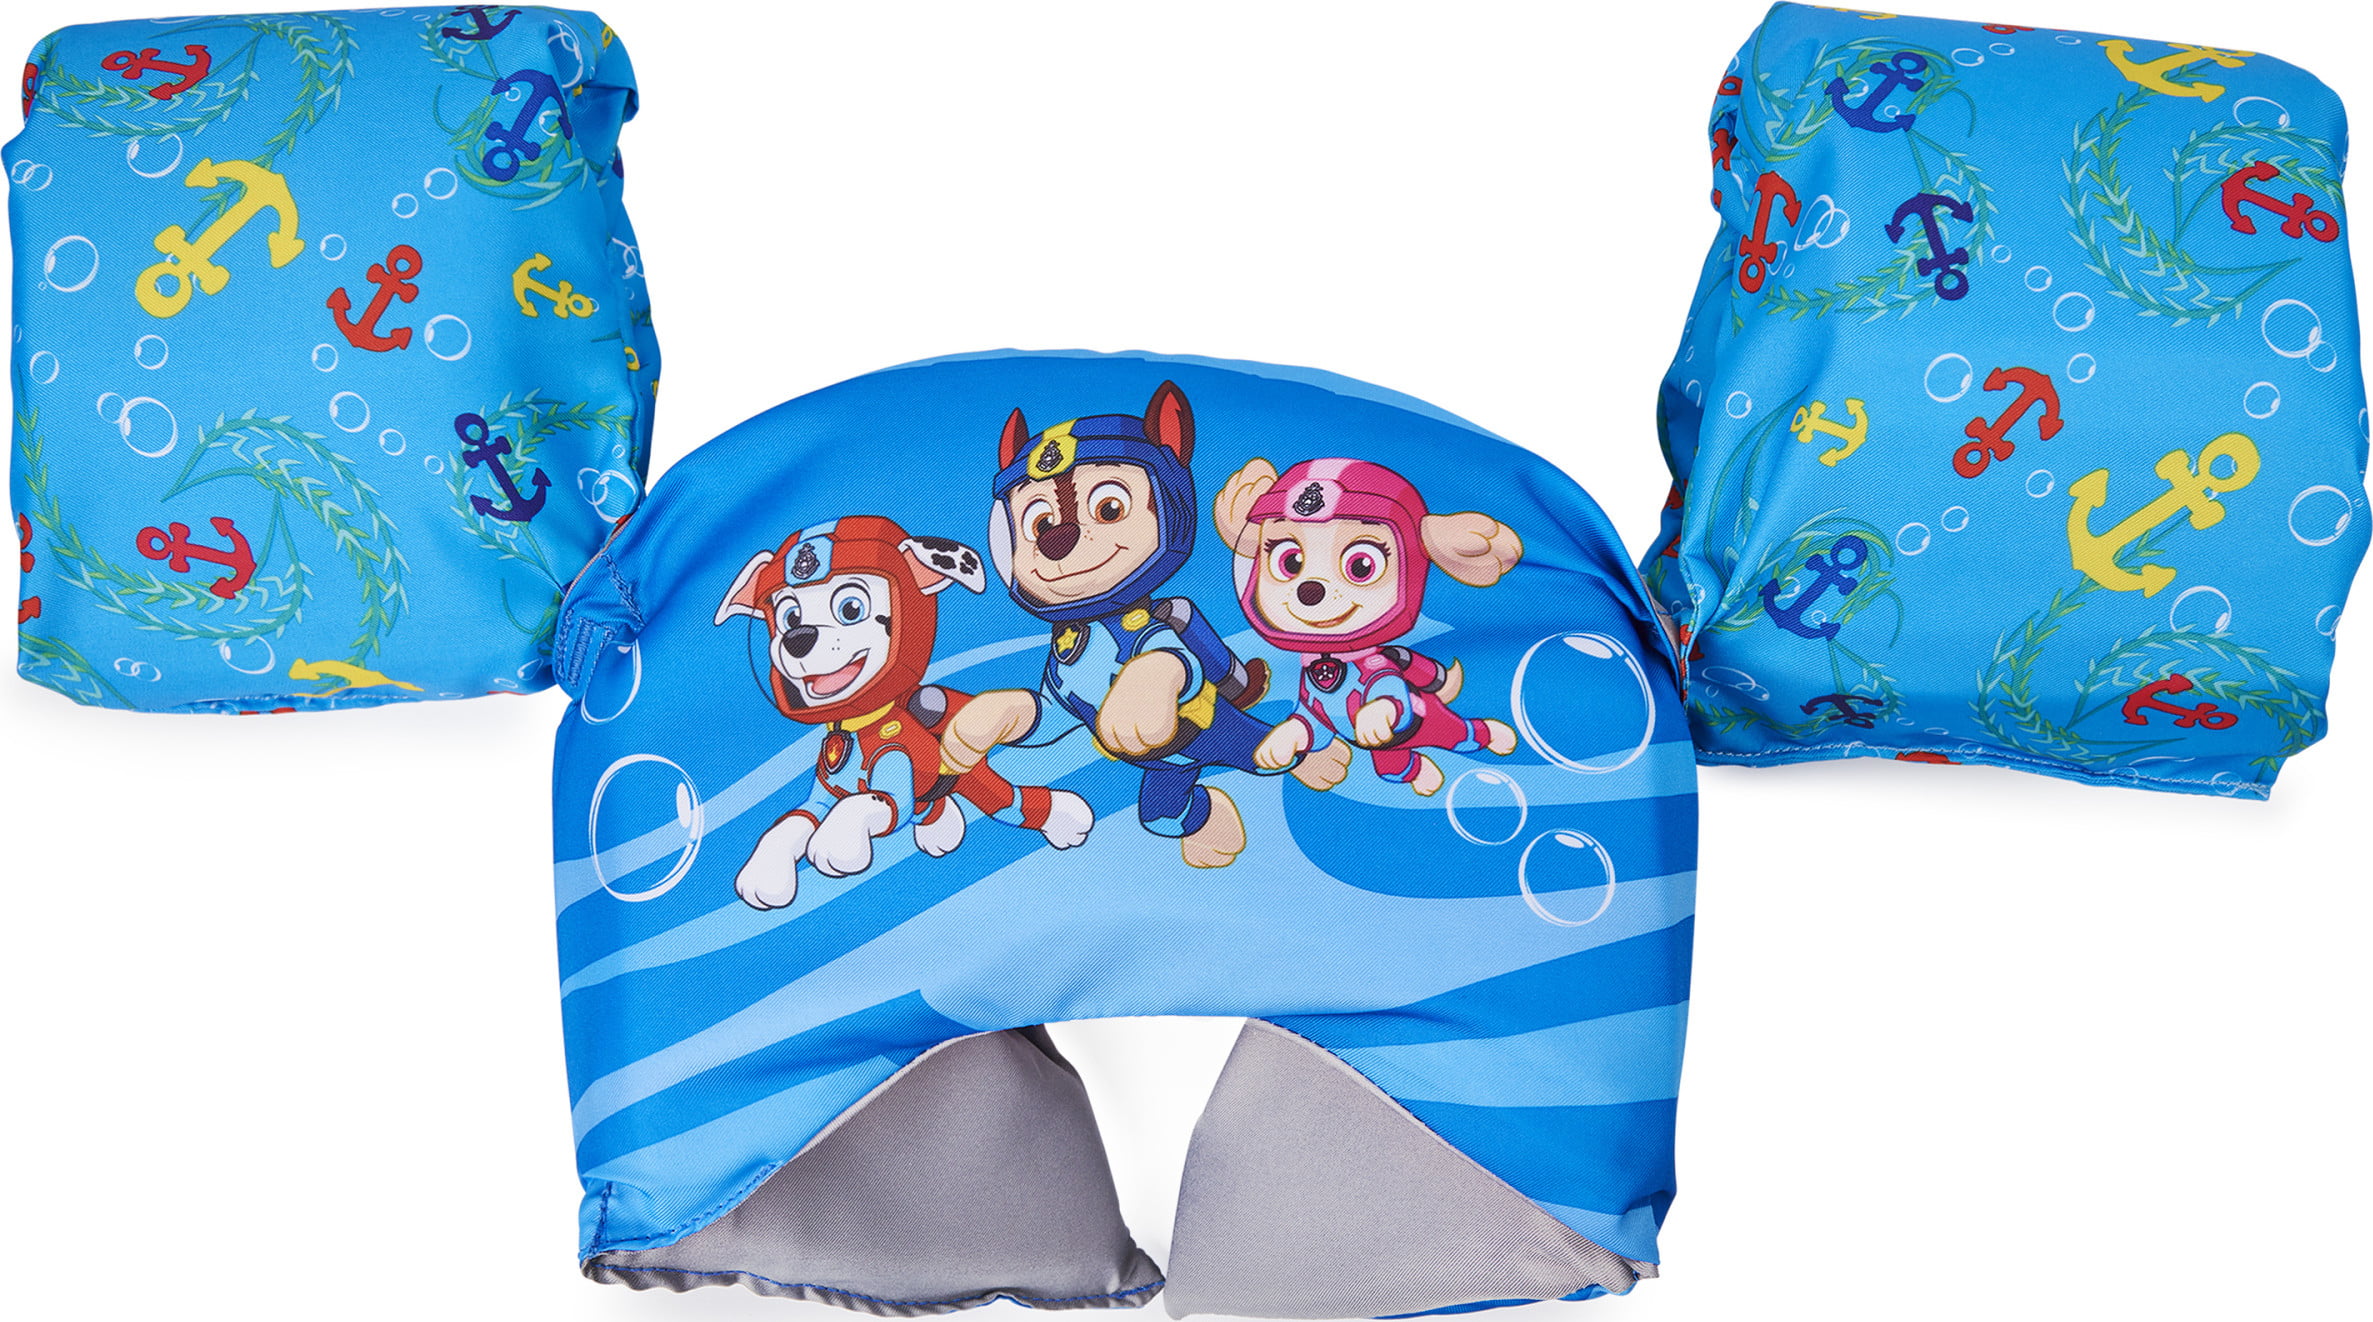 Paw Patrol Childs Kids SwimWays Chase Swim Trainer Life Jacket 30-50 Lbs for sale online 